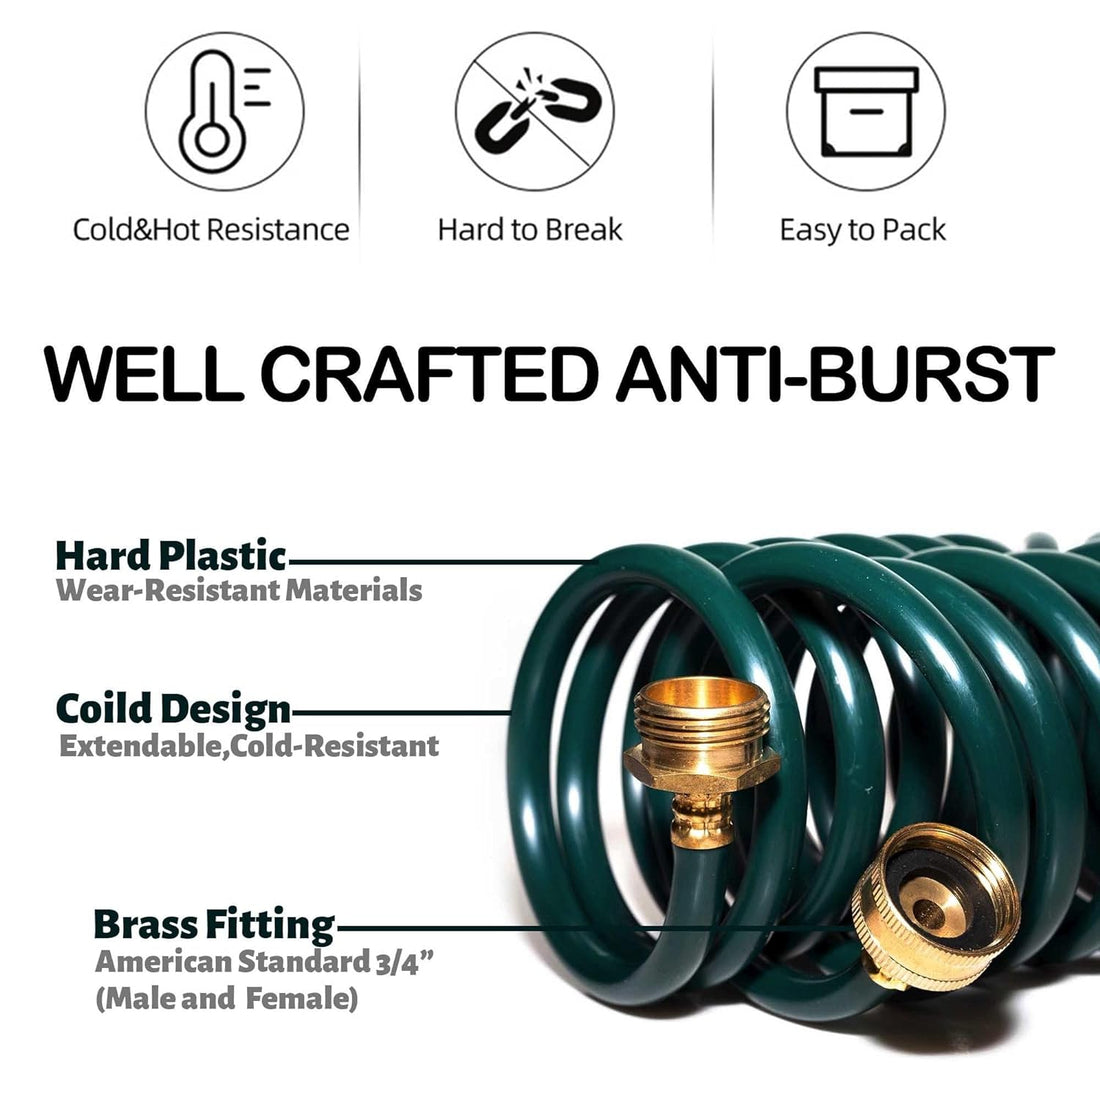 FUNJEE Lightweight EVA Coil 20 FT Garden Hose with 3/4" GHT Solid Brass Fittings, Retractable Corrosion Resistant Water Hose with Brass Connectors, for Lawn, Car Washing (20FT, Green)